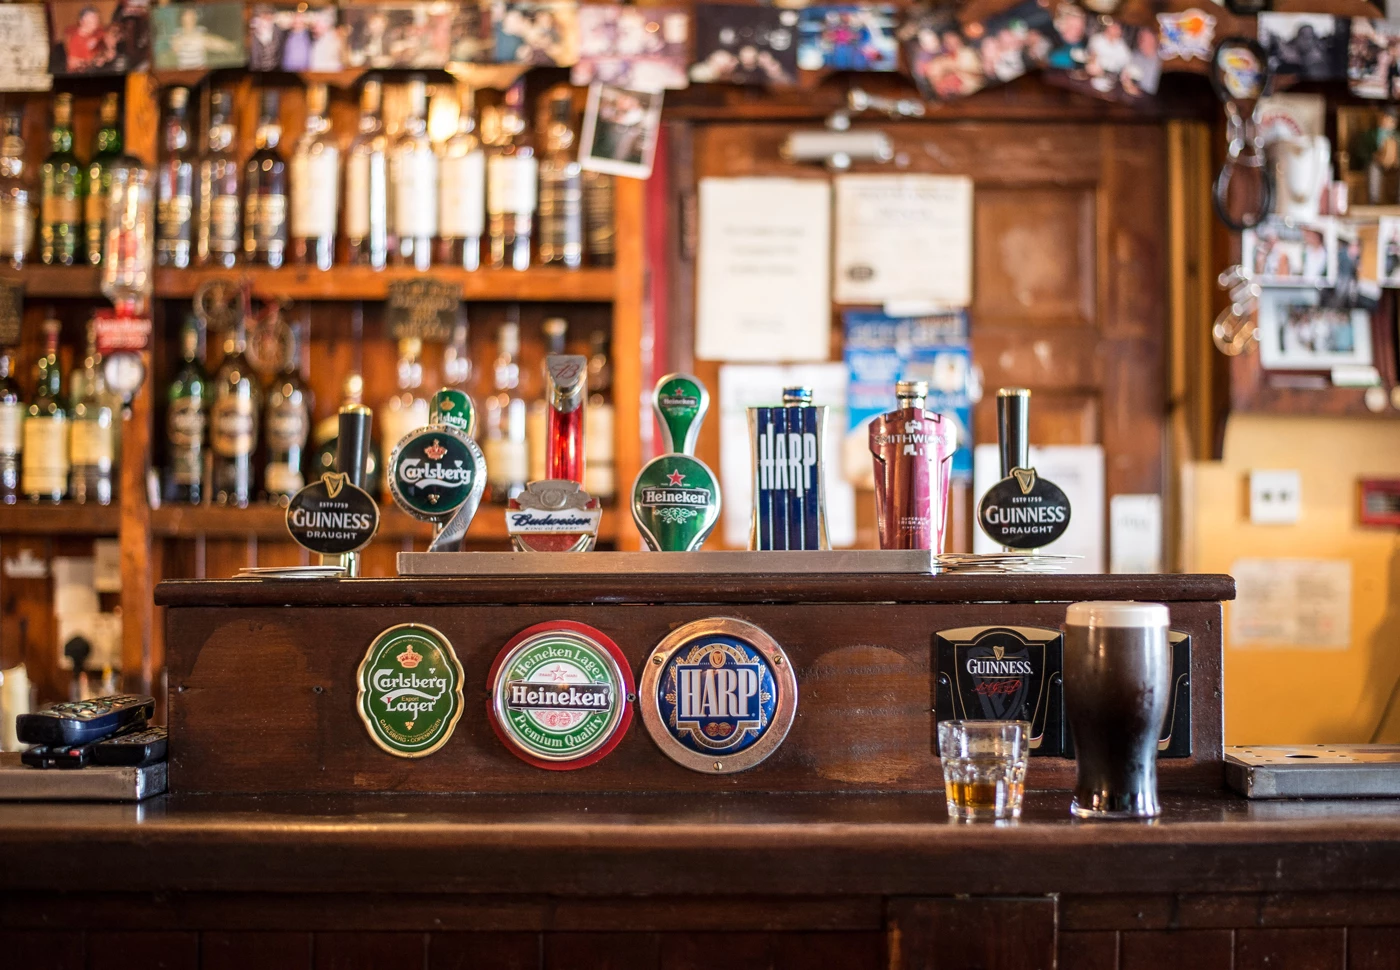 A bar in an English pub with various beers on tap